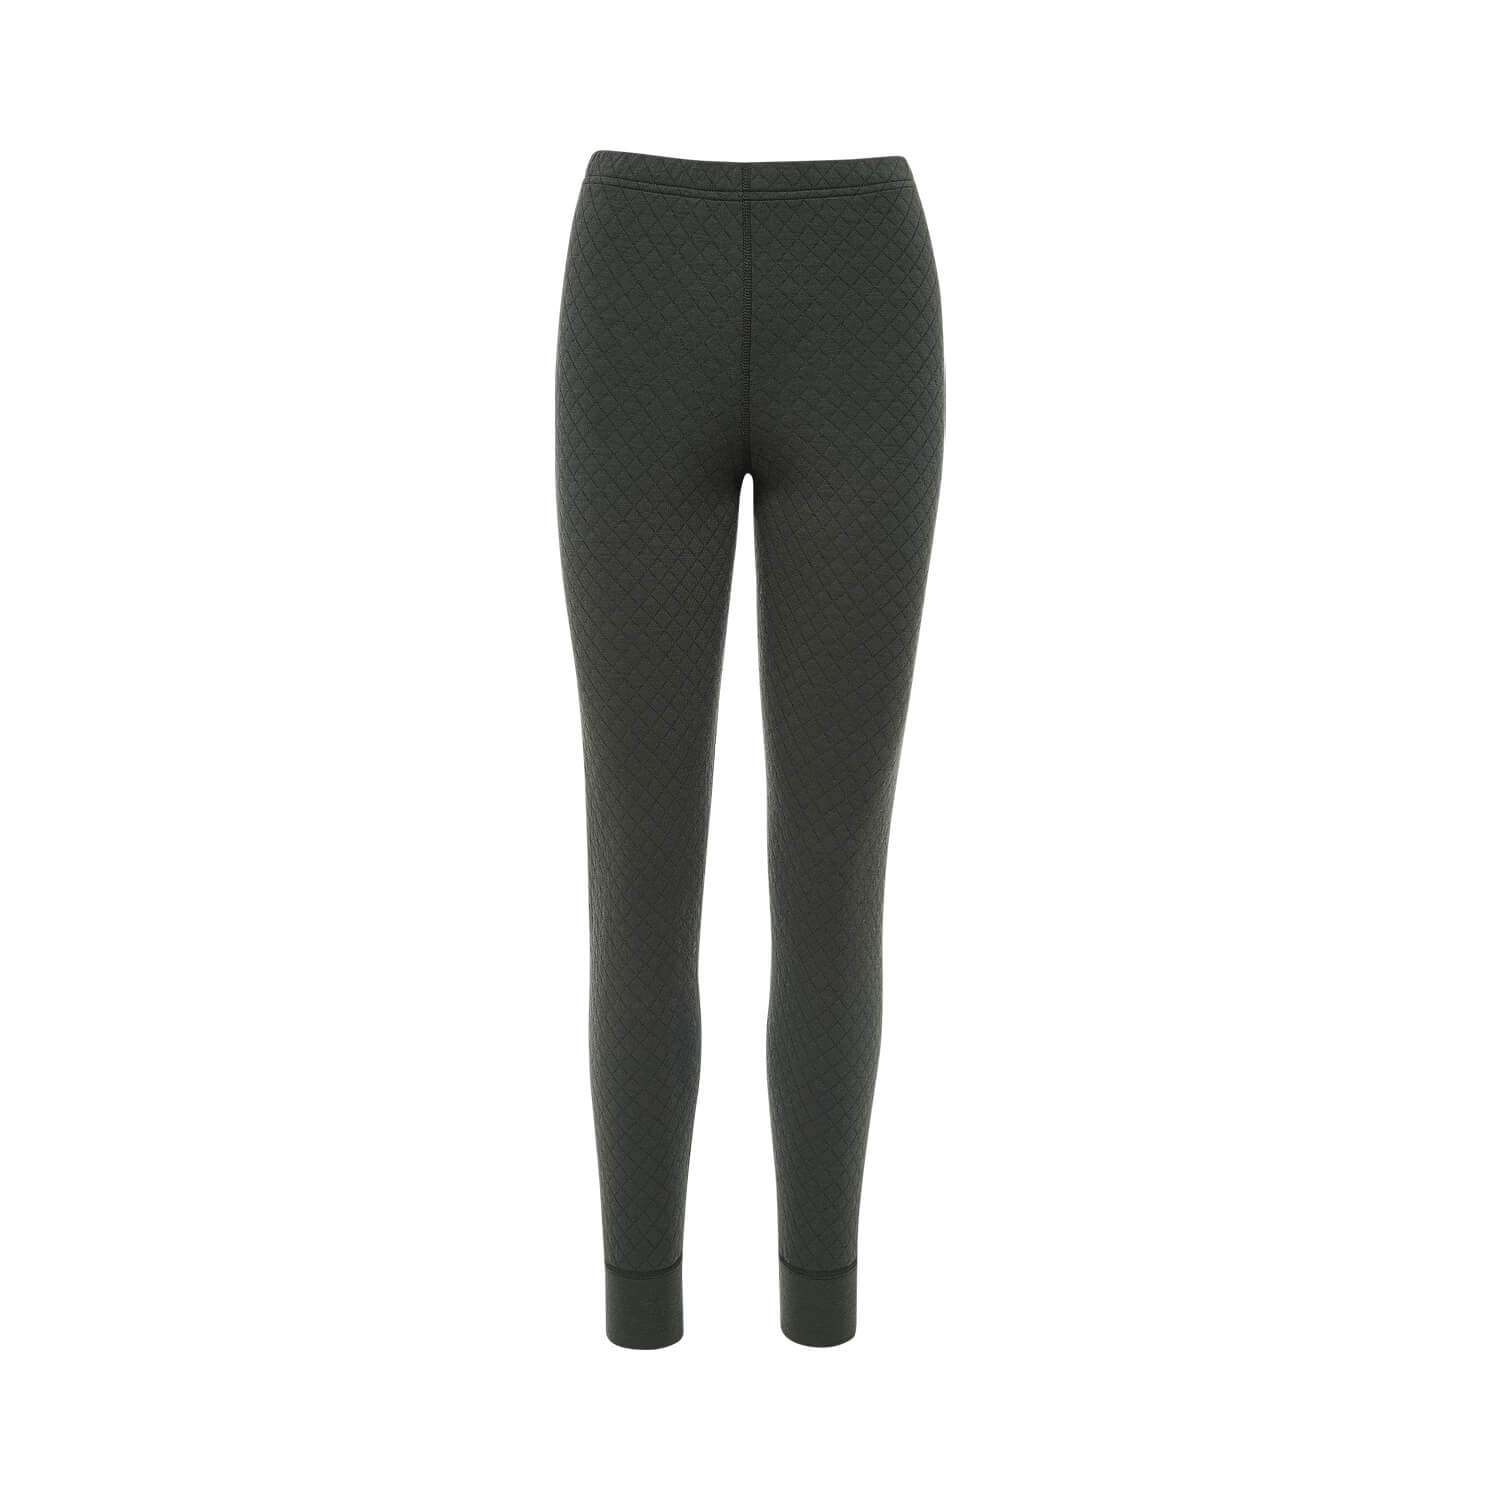 Thermowave long pants ladies 3in1